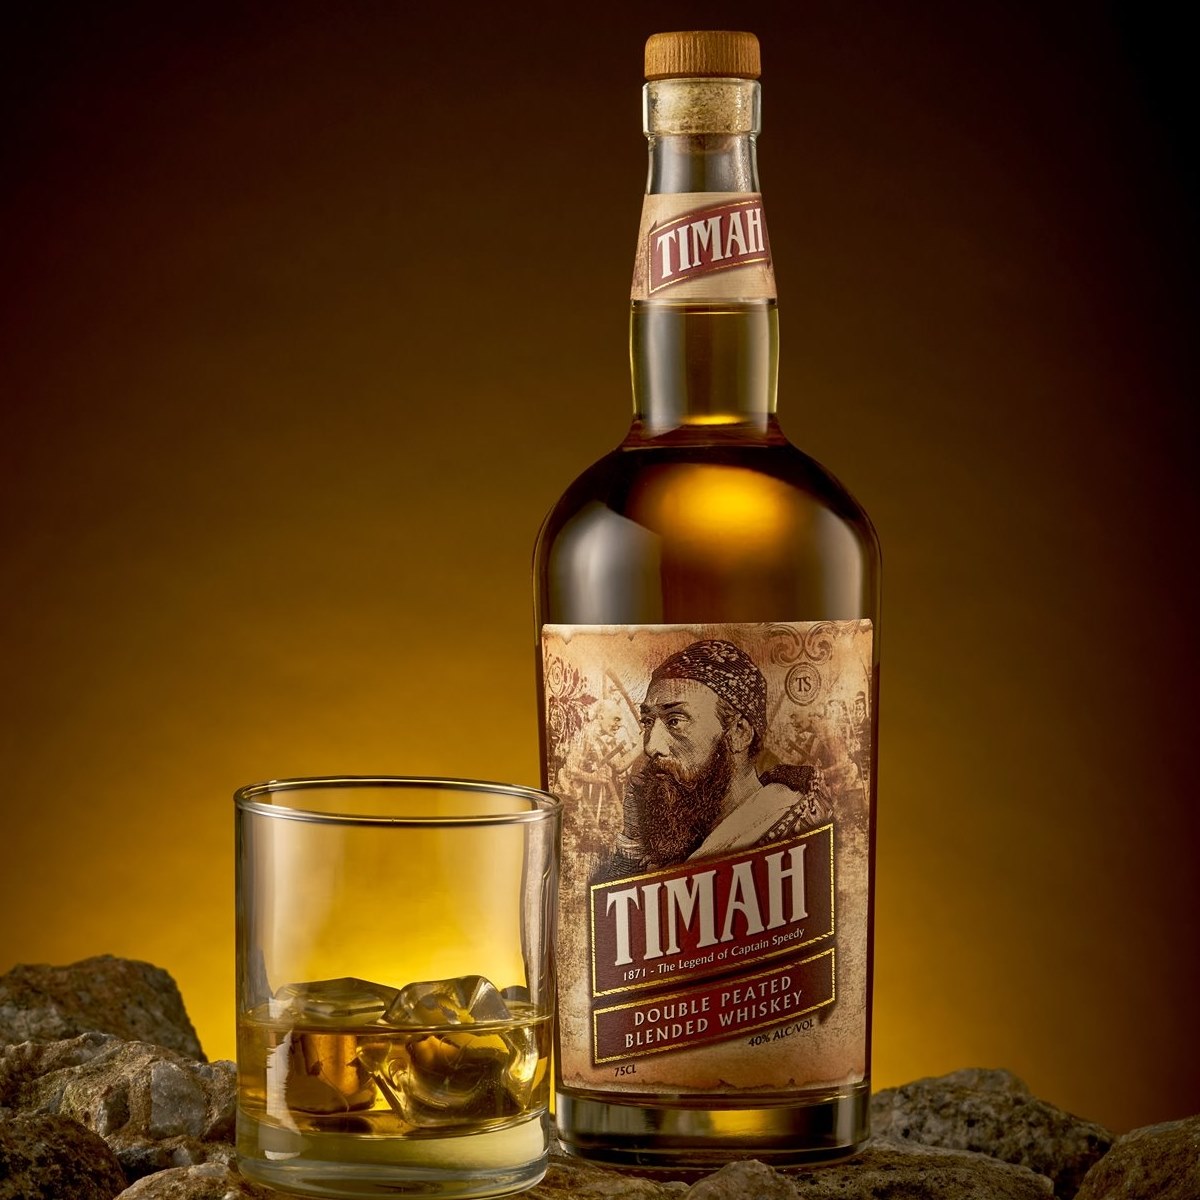 A bottle of Timah whiskey.